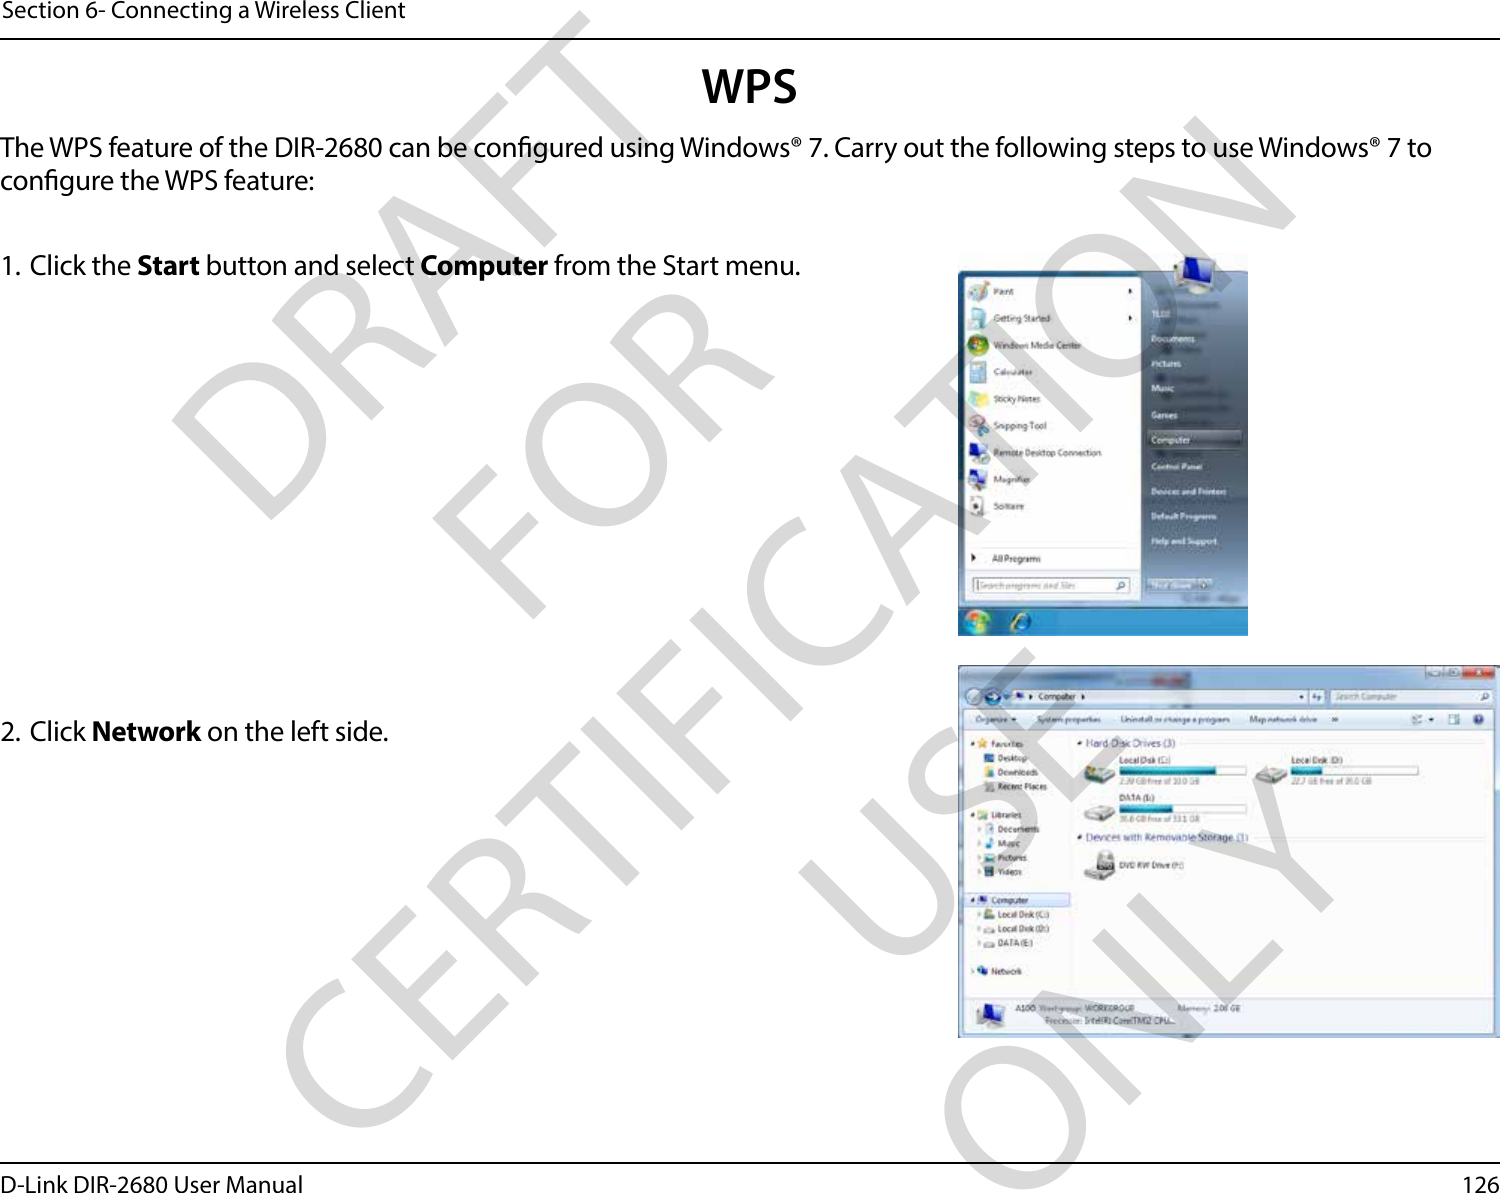 126D-Link DIR-2680 User ManualSection 6- Connecting a Wireless ClientWPSThe WPS feature of the DIR-2680 can be congured using Windows® 7. Carry out the following steps to use Windows® 7 to congure the WPS feature:1. Click the Start button and select Computer from the Start menu.2. Click Network on the left side.DRAFT FOR CERTIFICATION USE ONLY